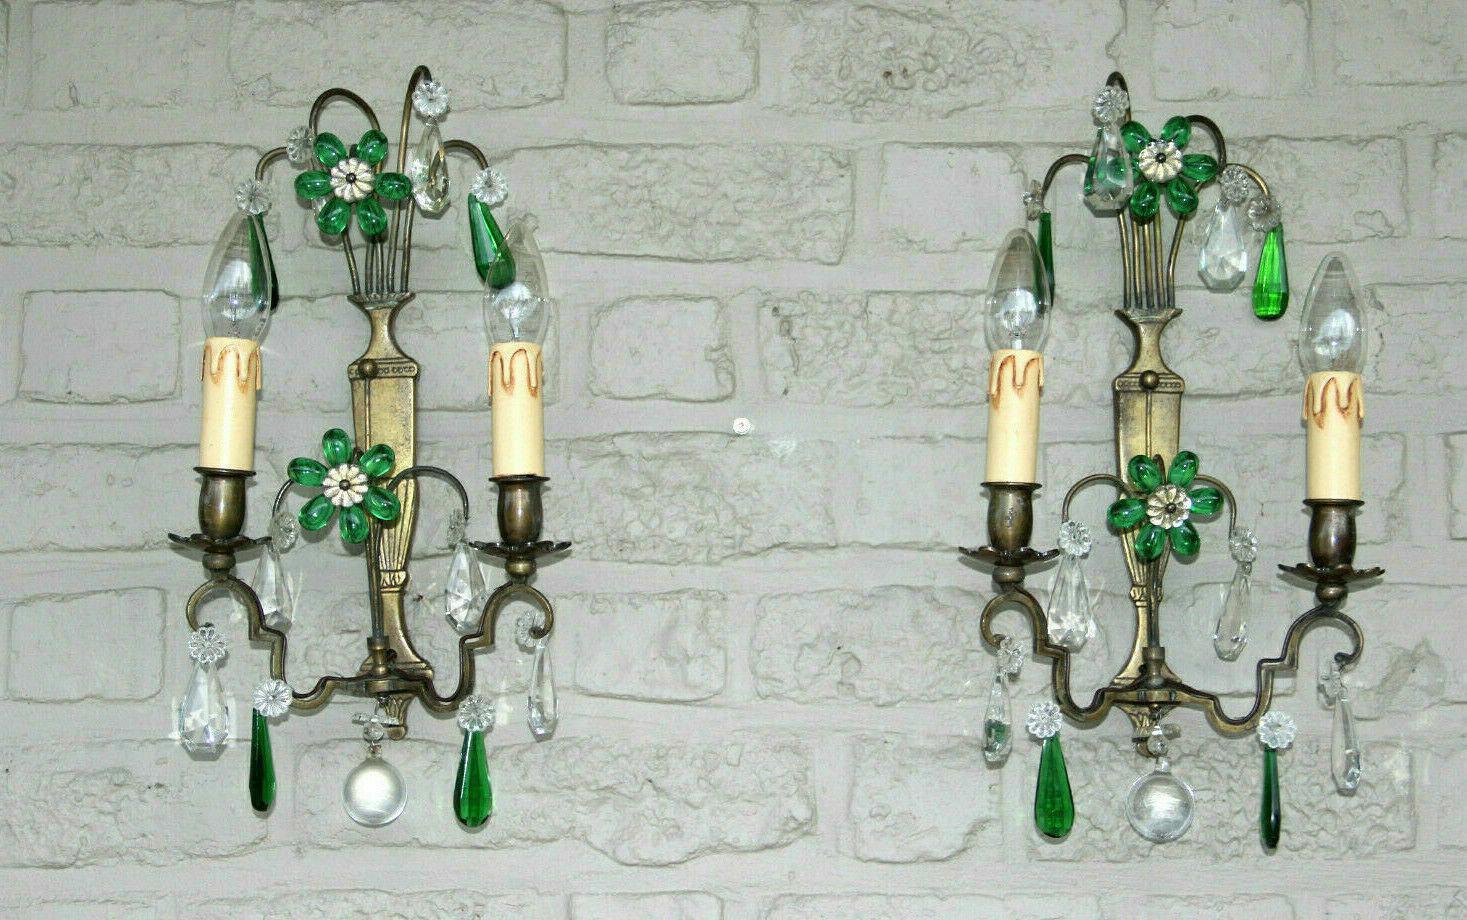 Pair of 1940s French Regency Emerald Green Crystal in Flower Form attributed to Maison Bagues Paris. Bronze framed. Stunning when lit and they show beautifully while off.